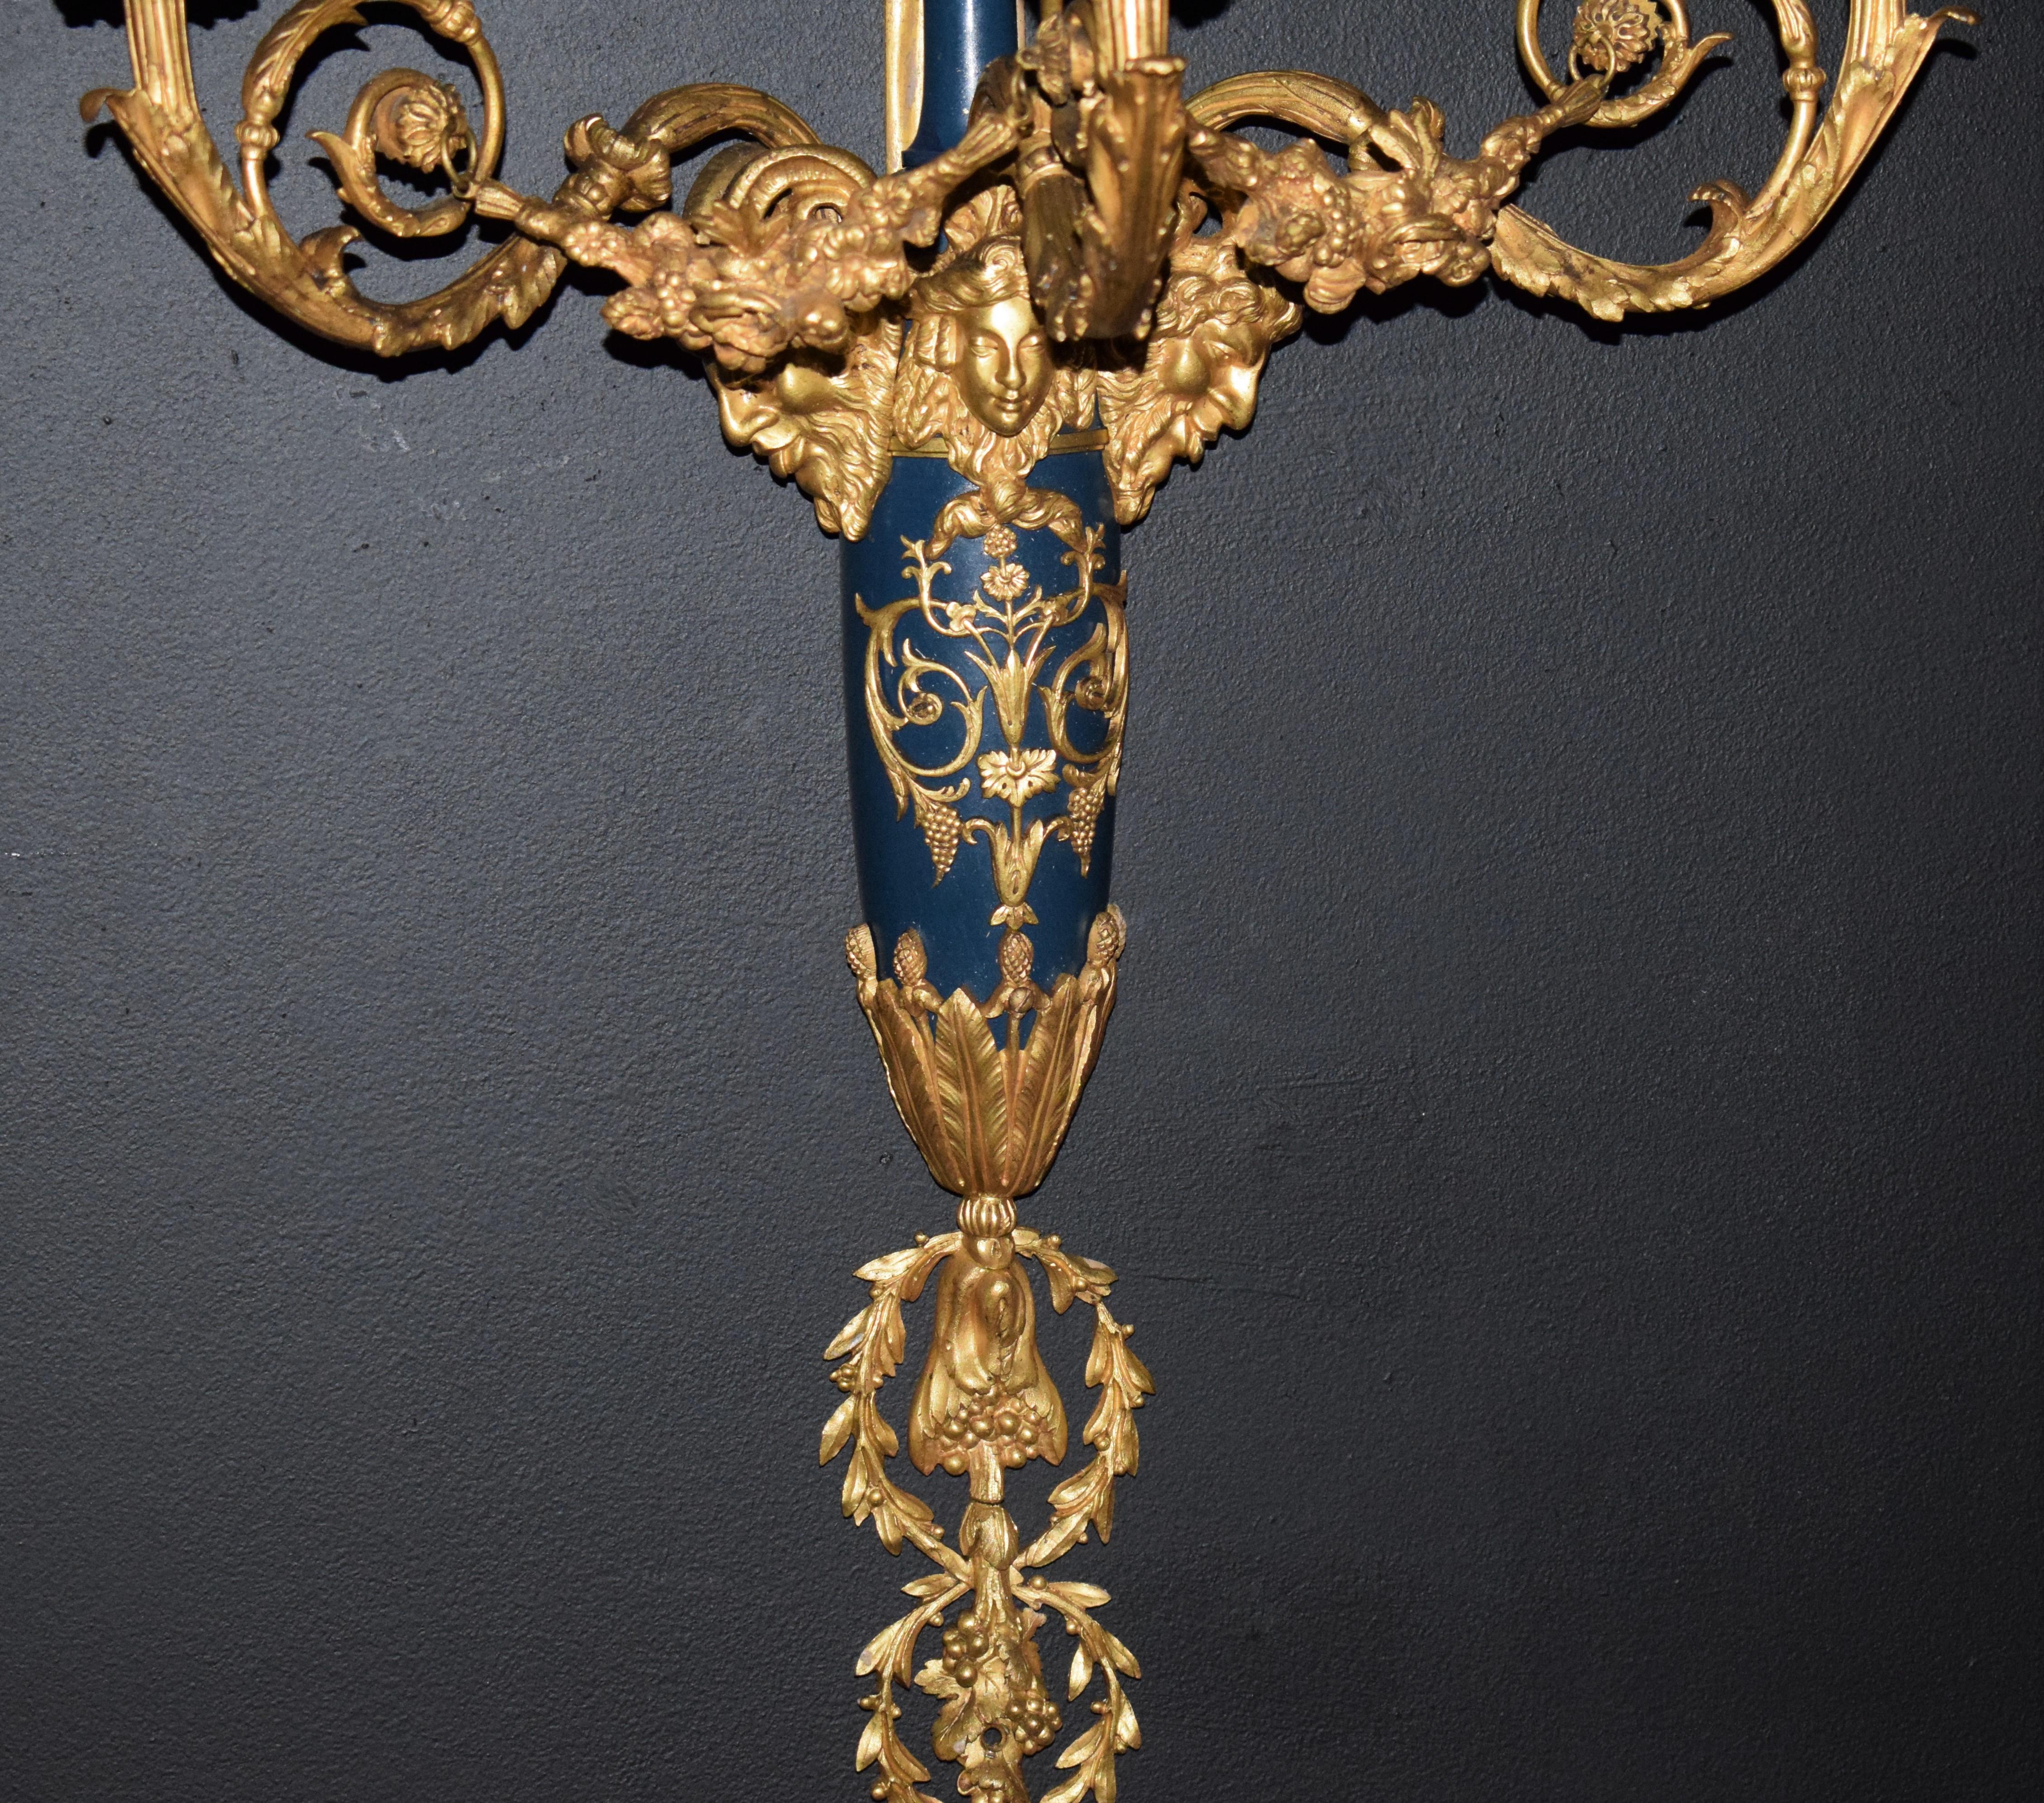 Louis XVI style wall sconces. A very fine pair of Louis XVI style partially enameled and gilt bronze three light wall sconces. France, circa 1900.

Dimensions: Depth 11 1/2 x Height 37 x width 18 inches.

CW4867.